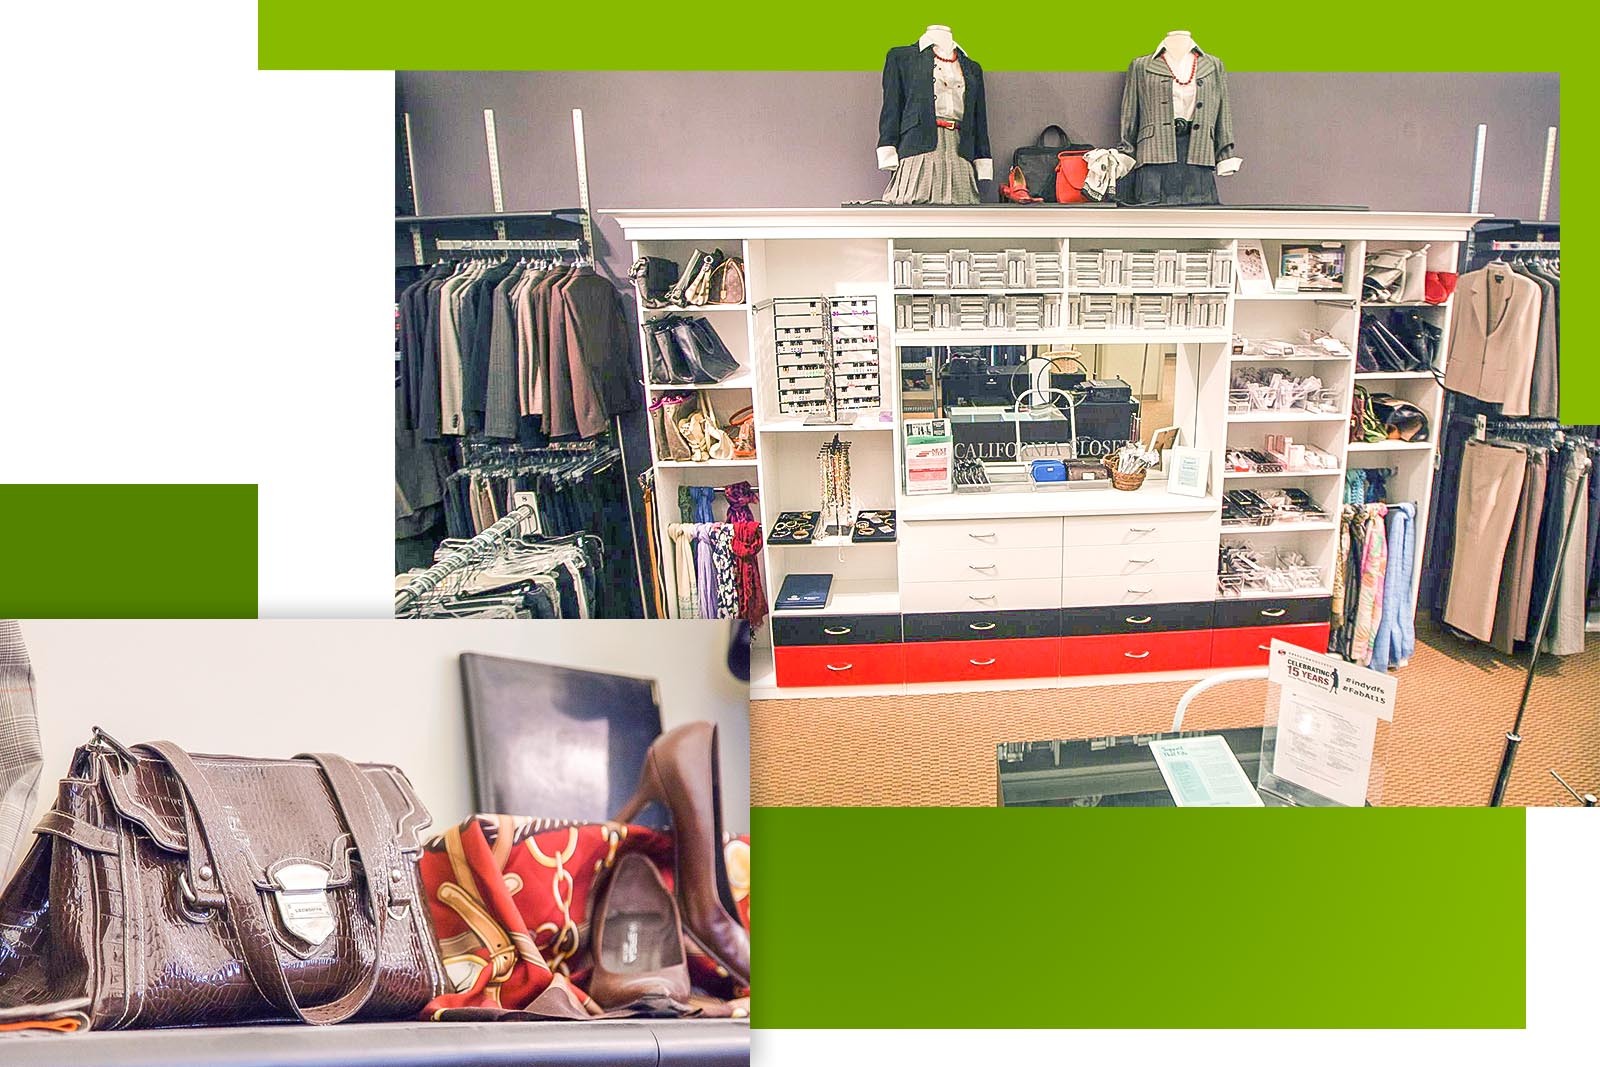 photos of store interior with clothes and accessories